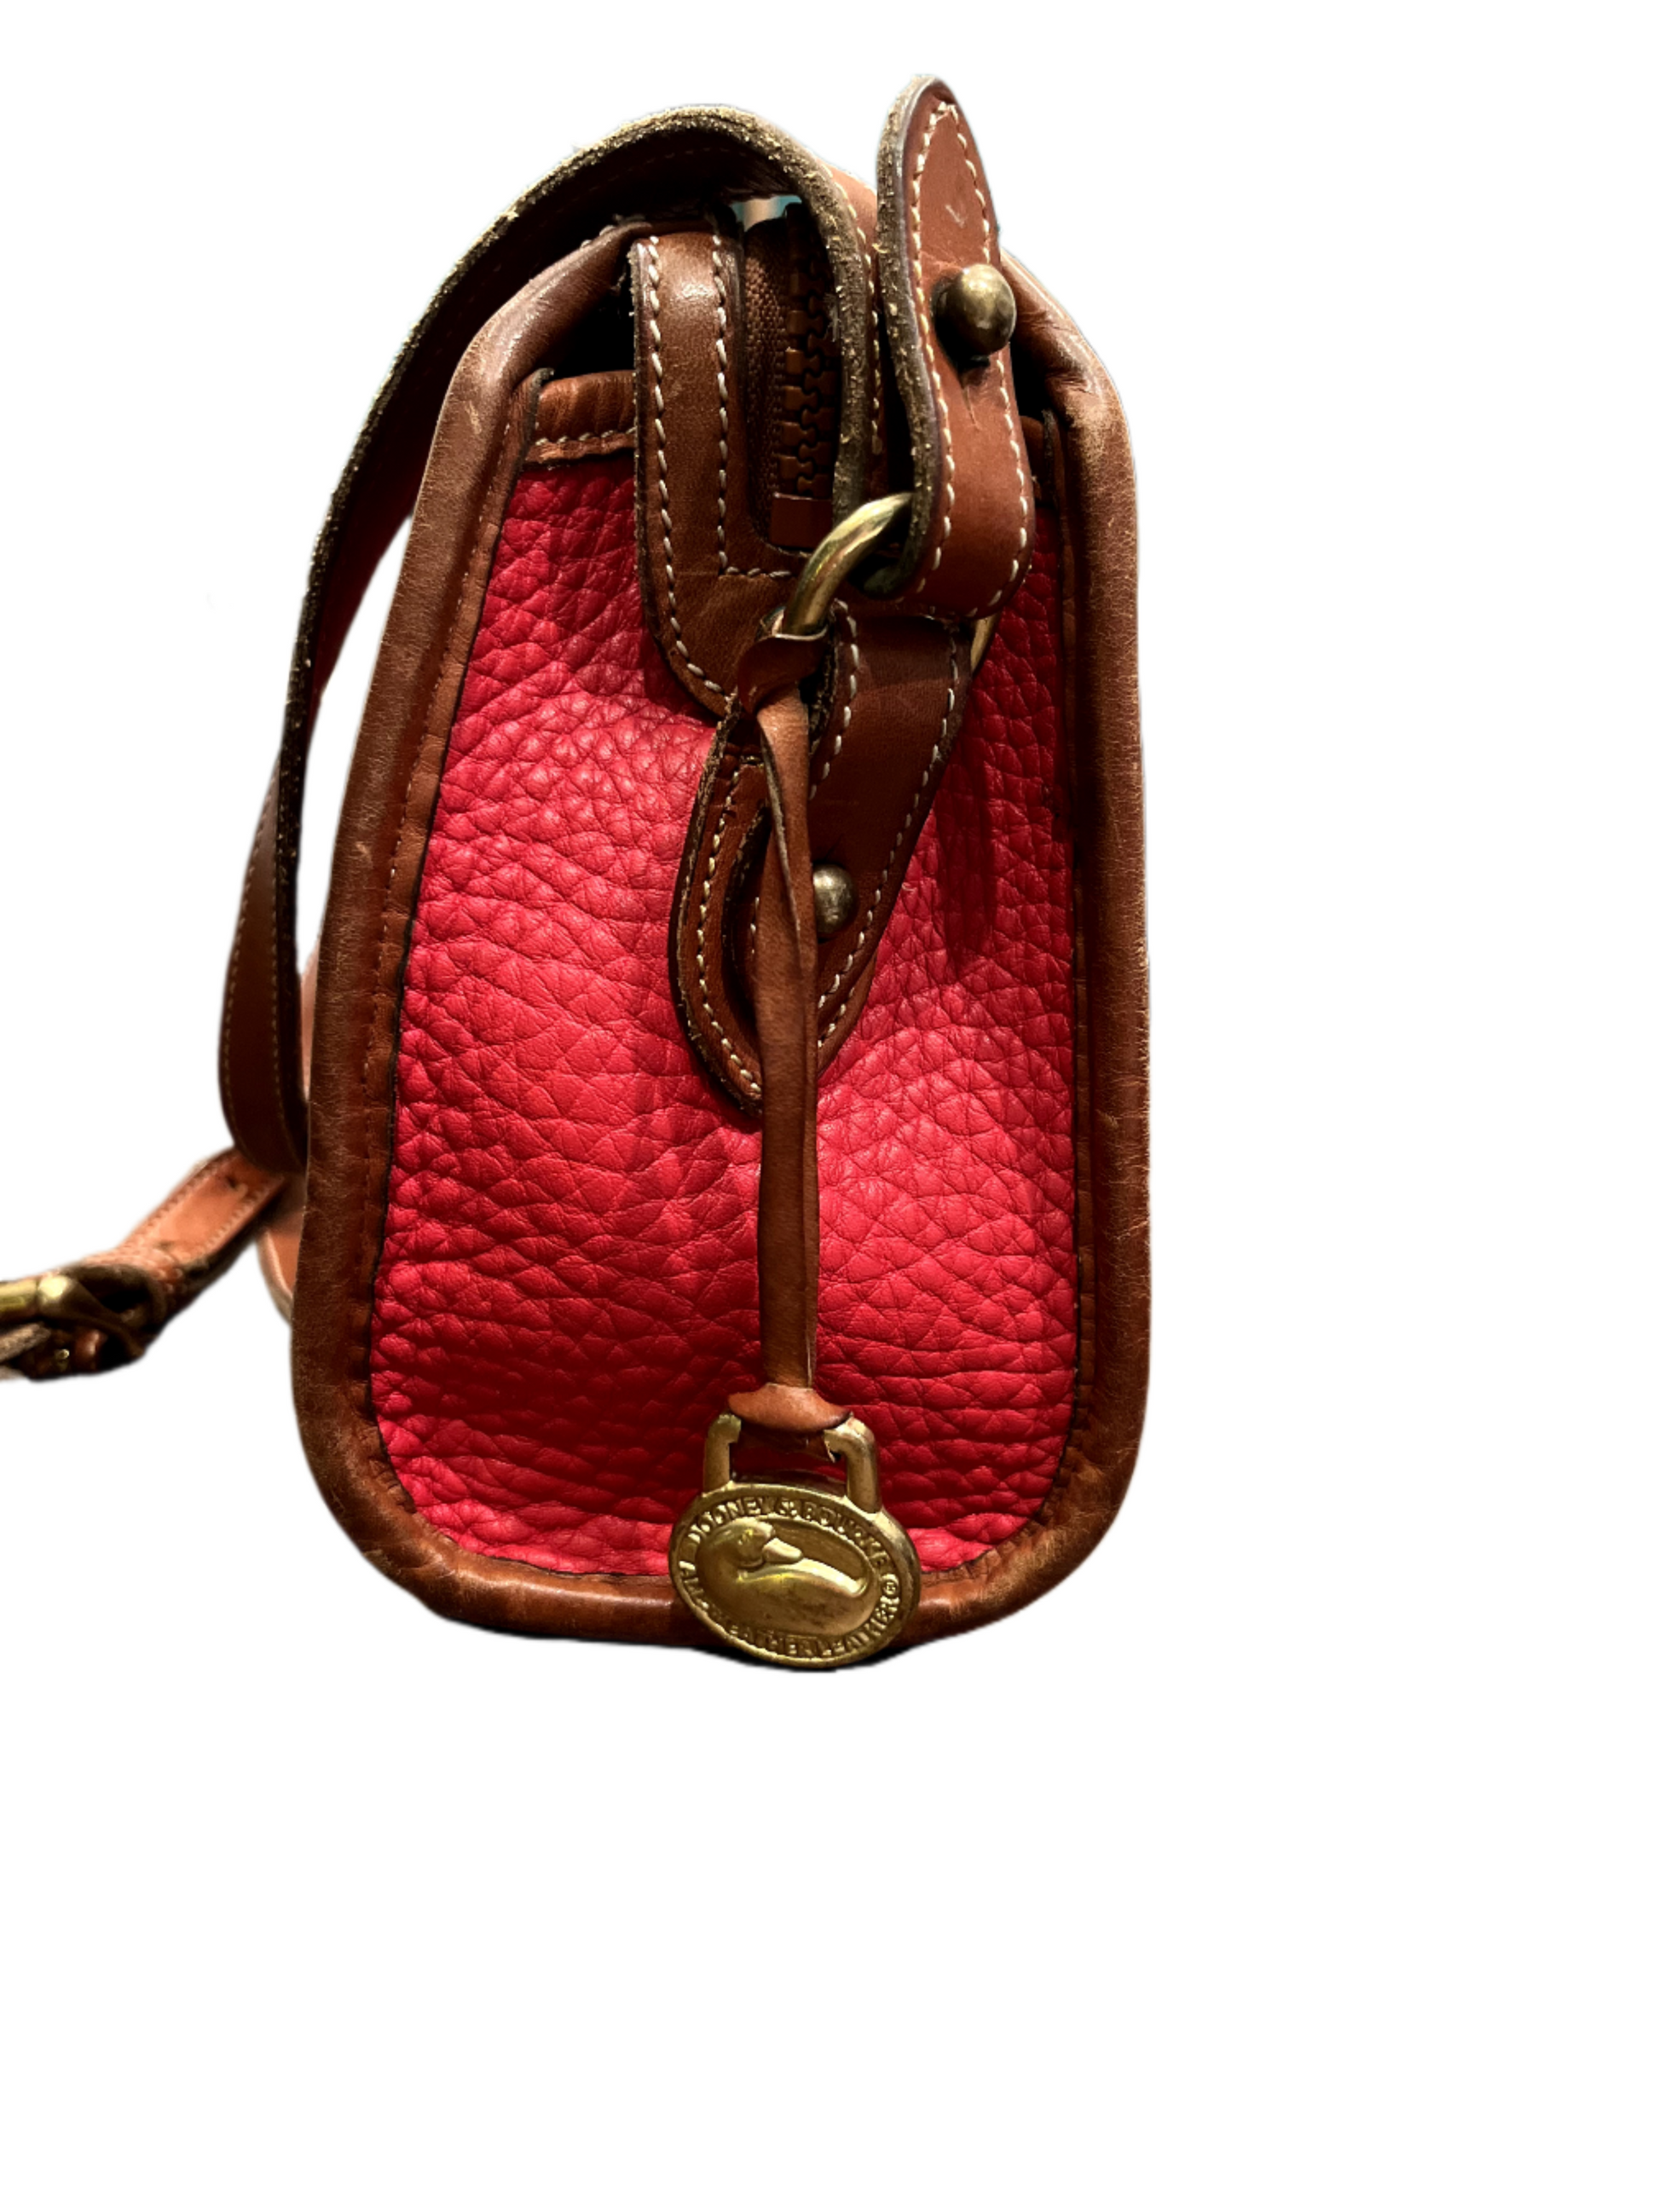 Side view of red Dooney & Bourke purse with tan leather strap and brass charm on white background.